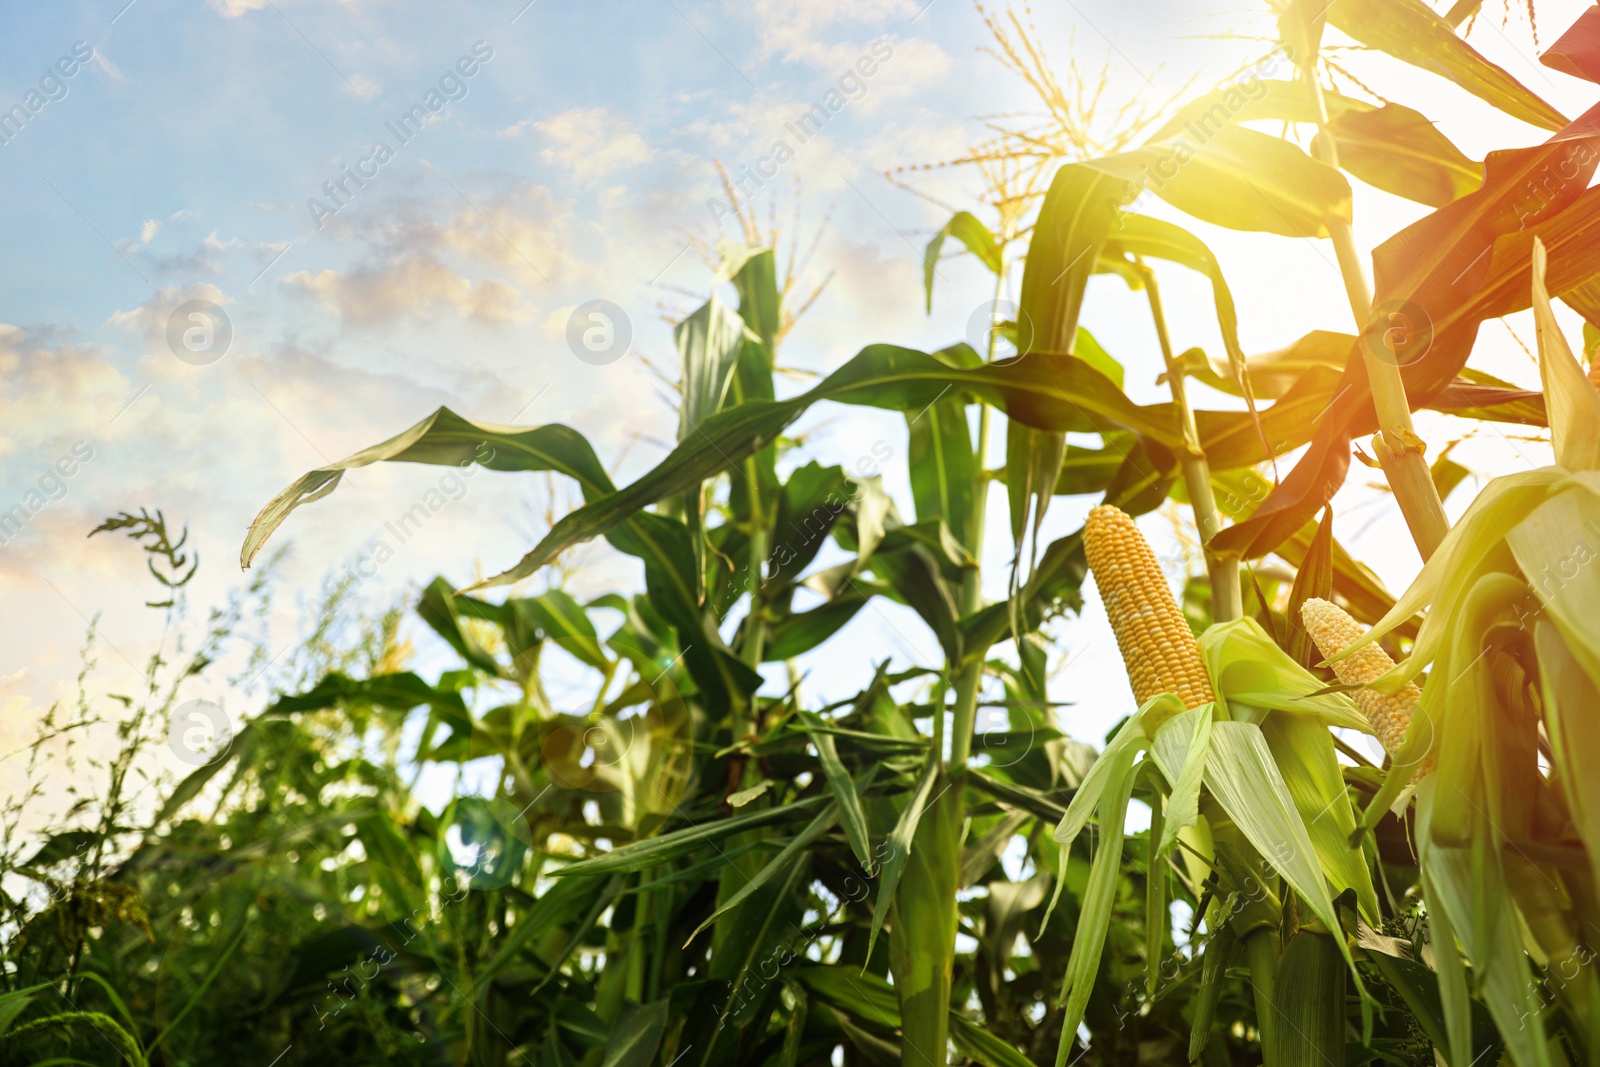 Image of Corn field under beautiful sky with sun, low angle view